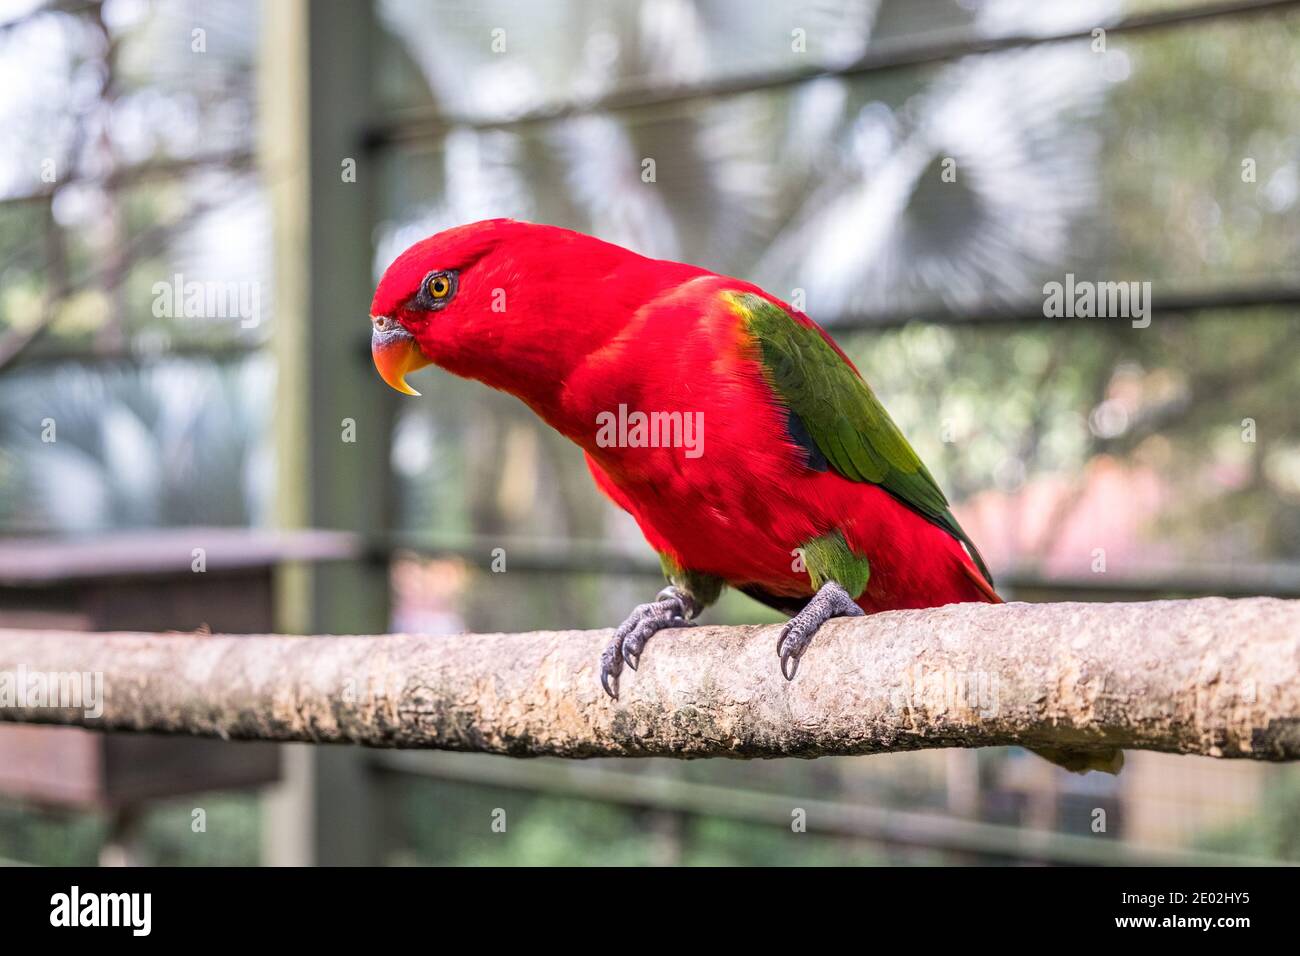 MALAYSIA, KUALA LUMPUR, JANUARY 07, 2018: Close-up of a chattering lory sitting in an aviary. Red green parrot in Kuala Lumpur Bird Park Stock Photo